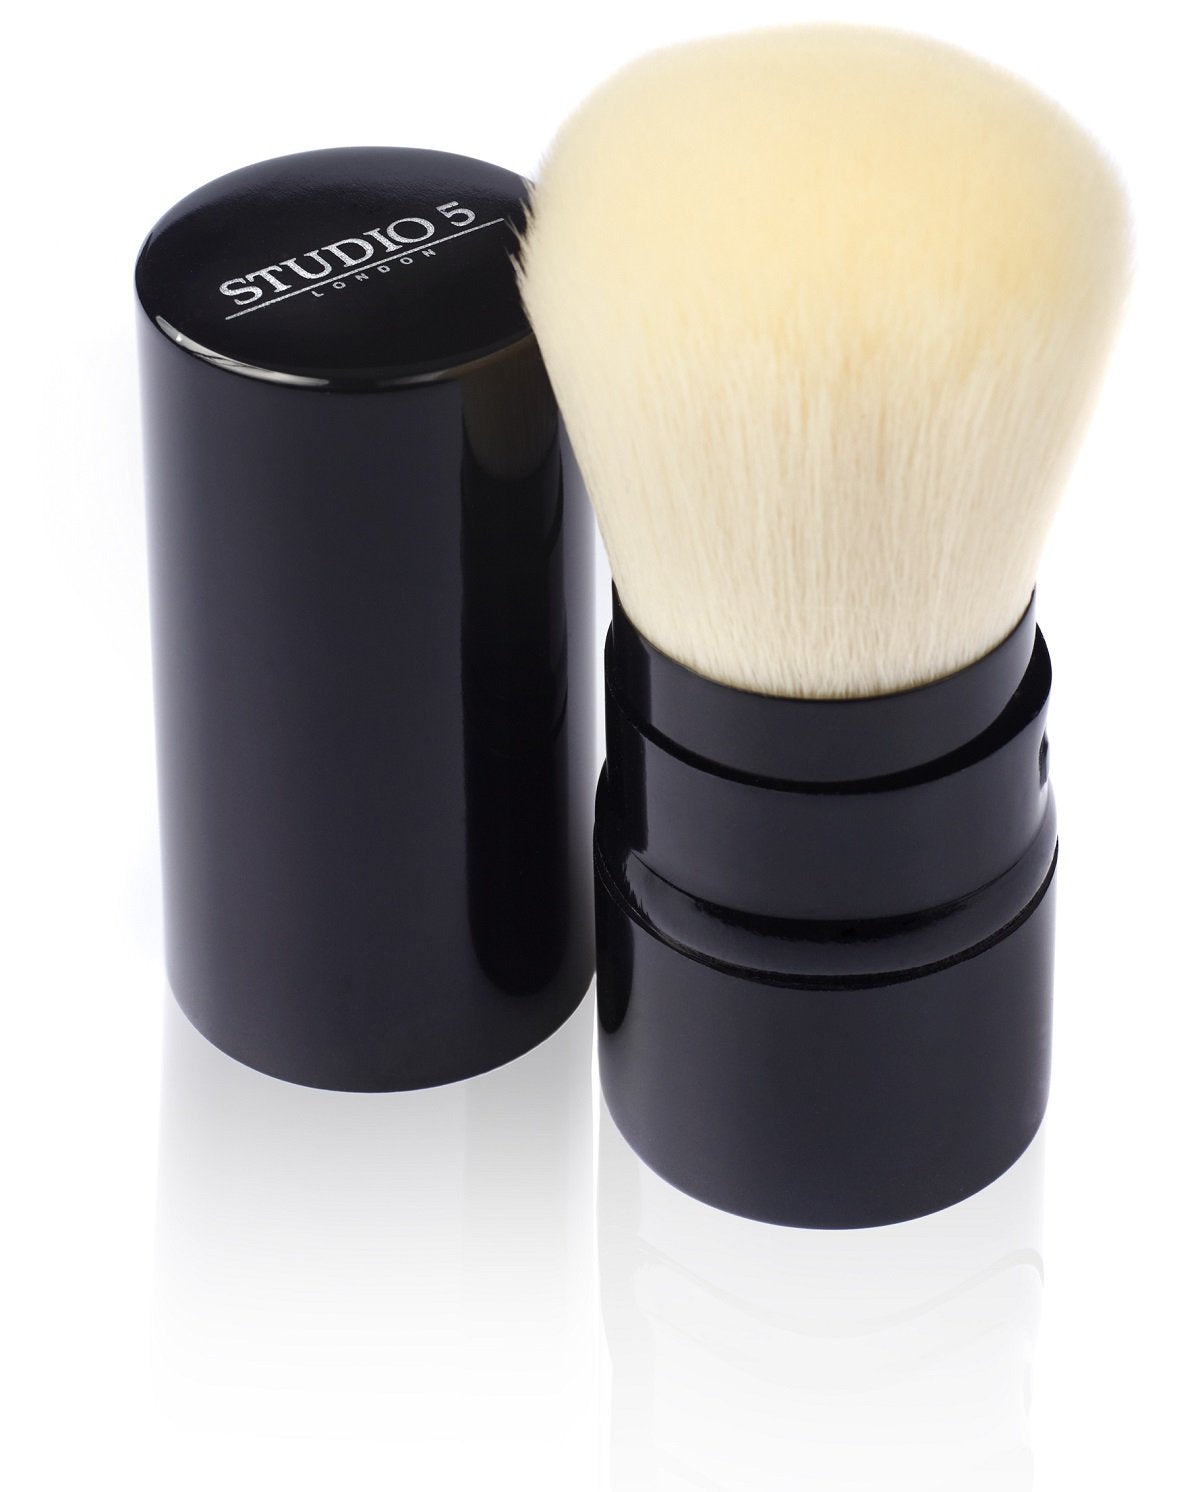 Retractable Kabuki Makeup Brush by Studio 5 Cosmetics – Apply Your Makeup on the Move. Apply Powders, Blush, Mineral Make up, Foundation. Closable - Perfect for Travel Bag or Case.